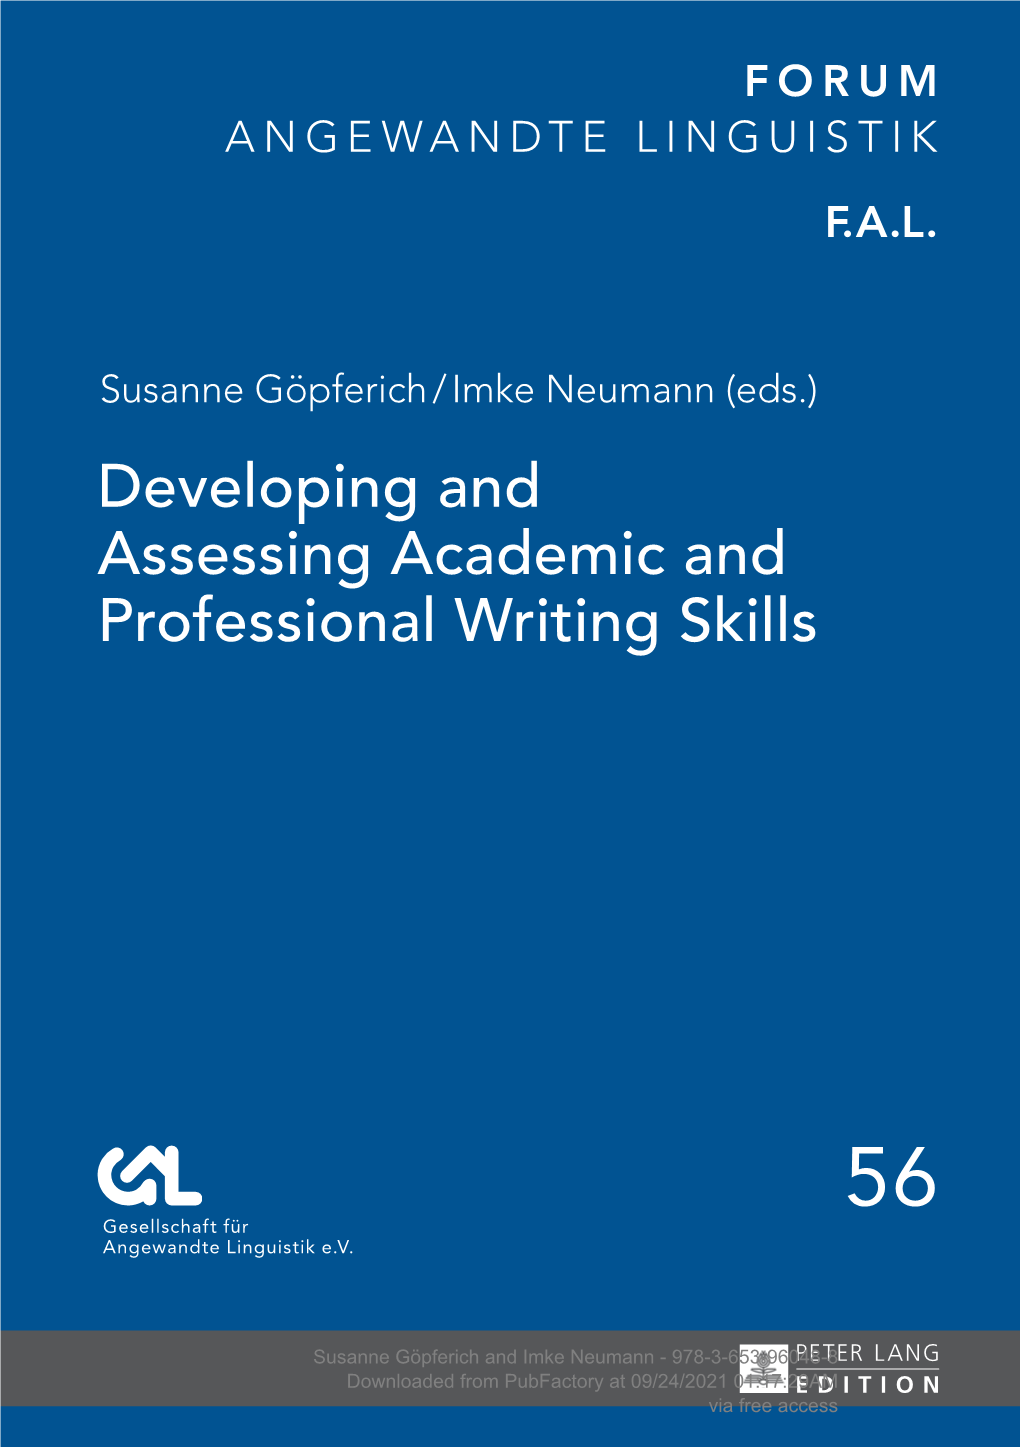 Developing and Assessing Academic and Professional Writing Skills